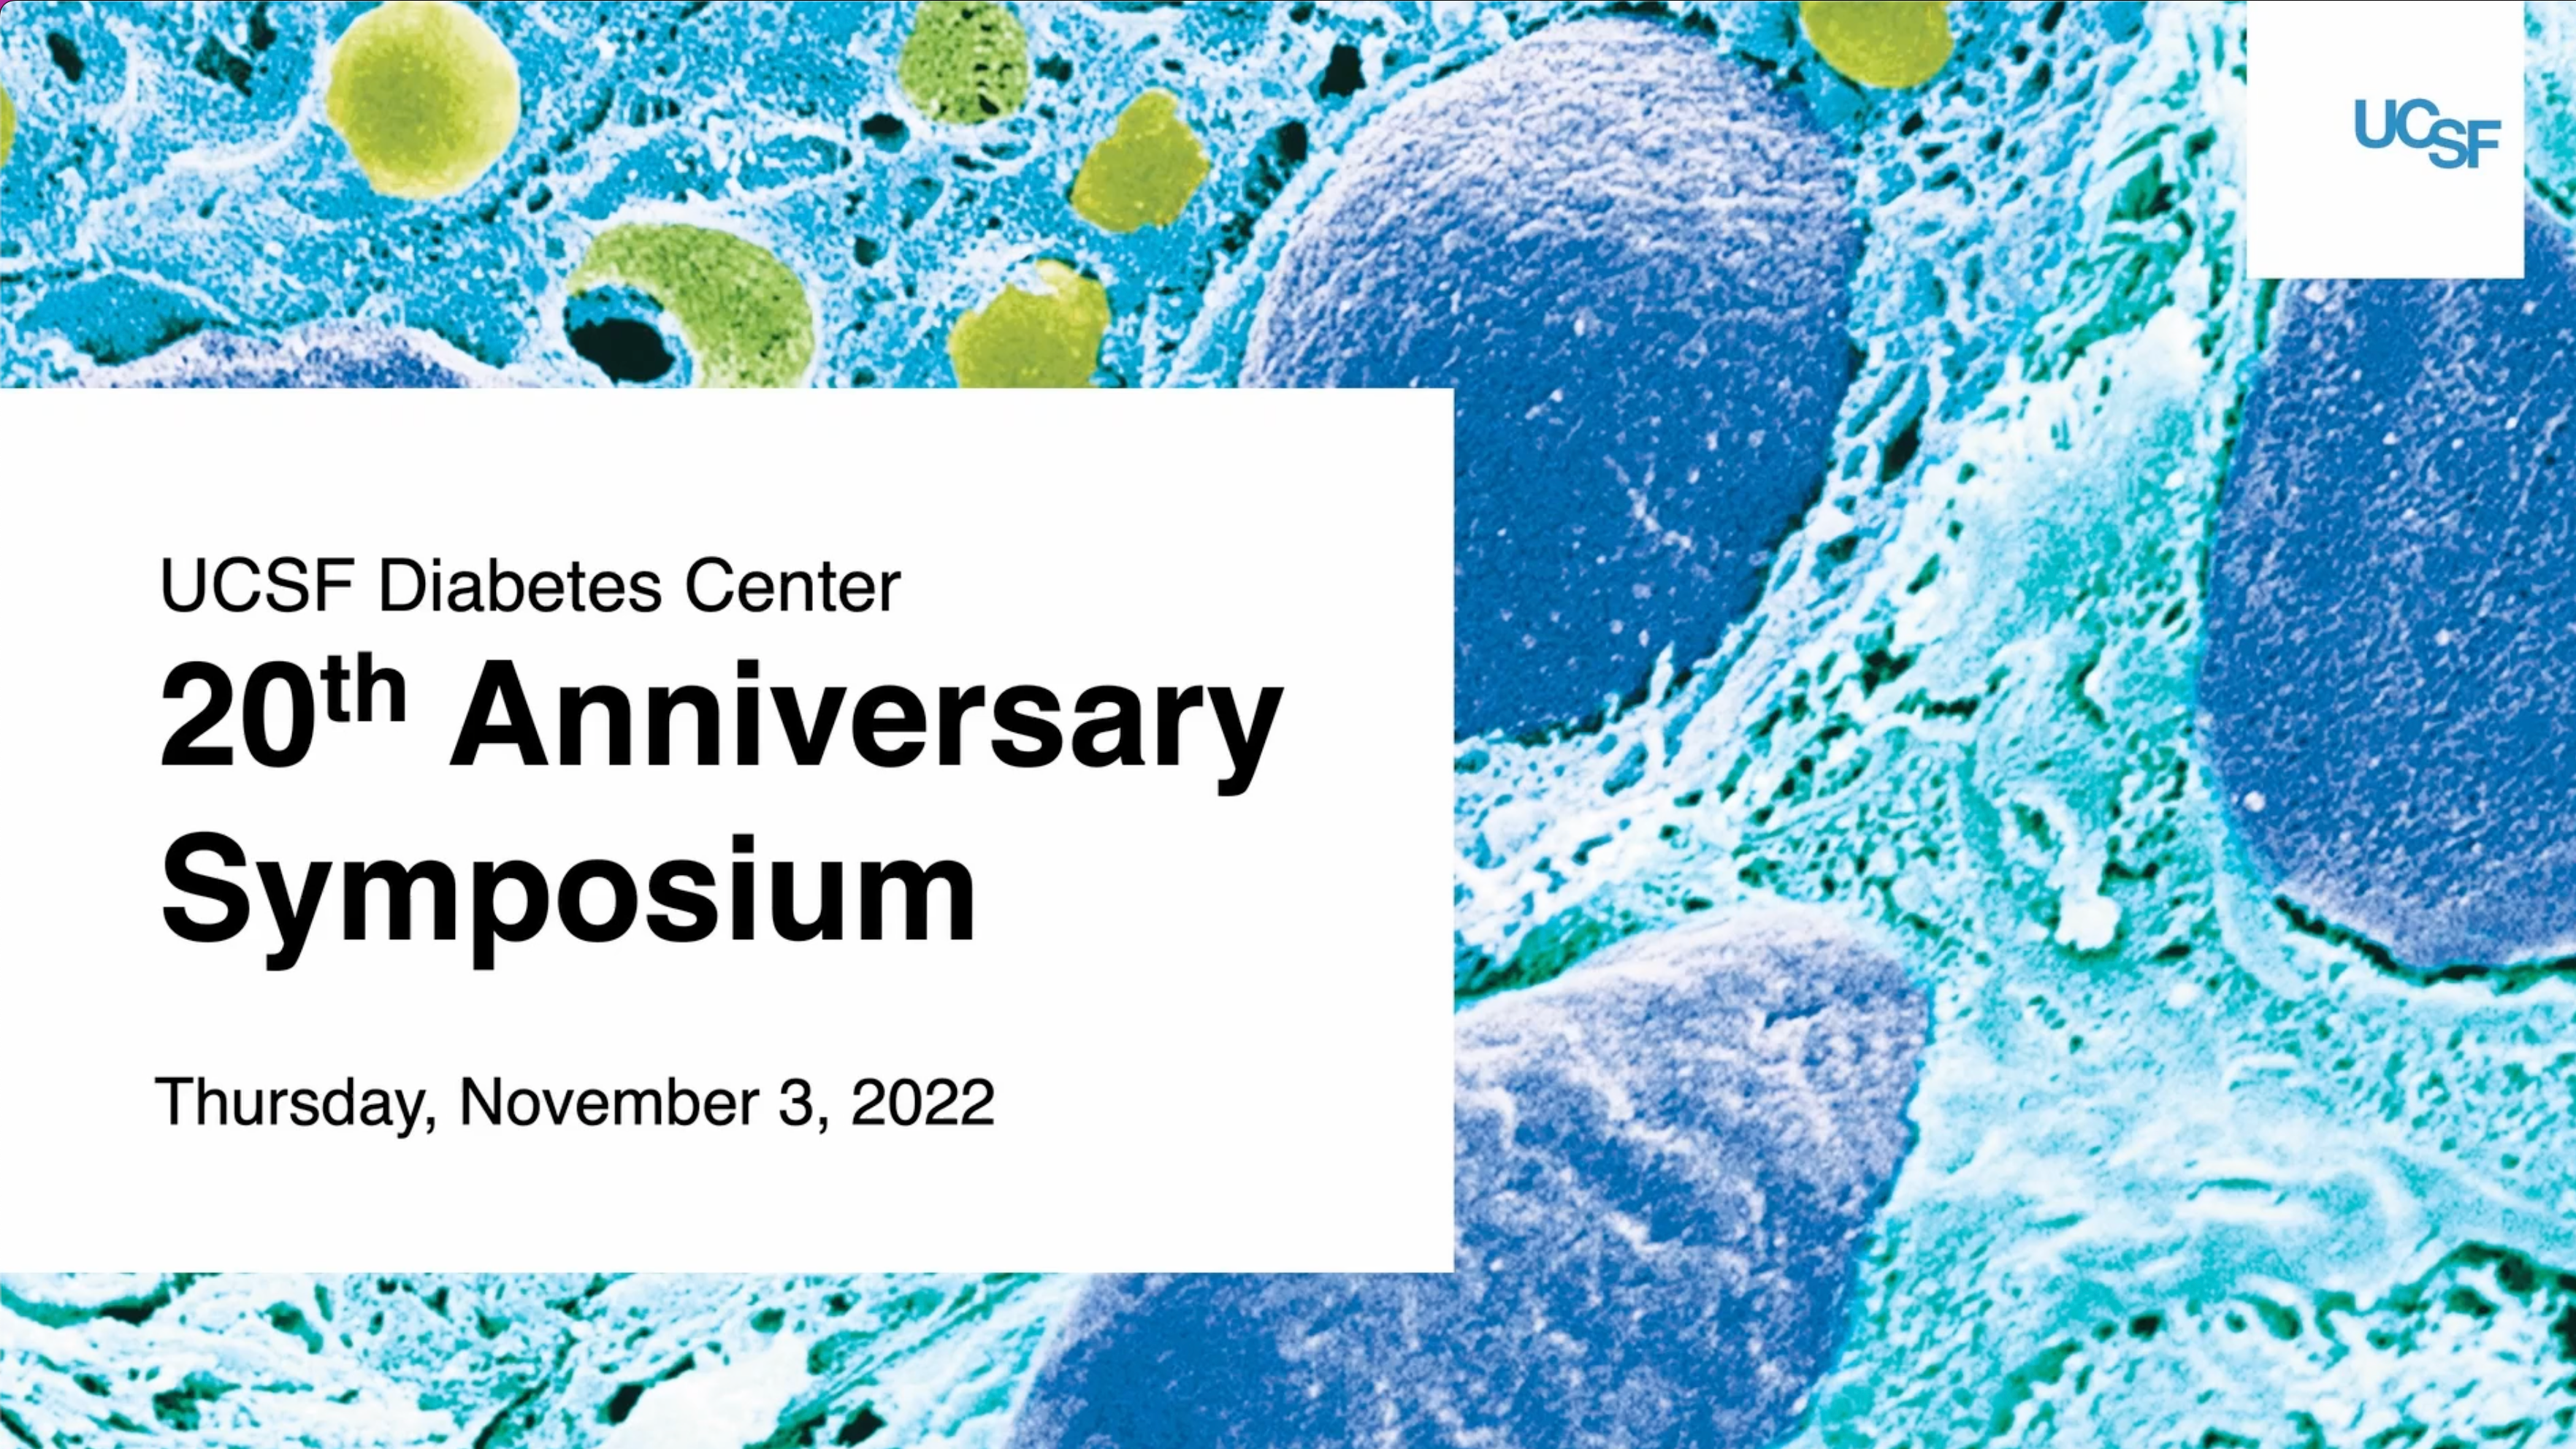 UCSF Diabetes Center 20th Anniversary